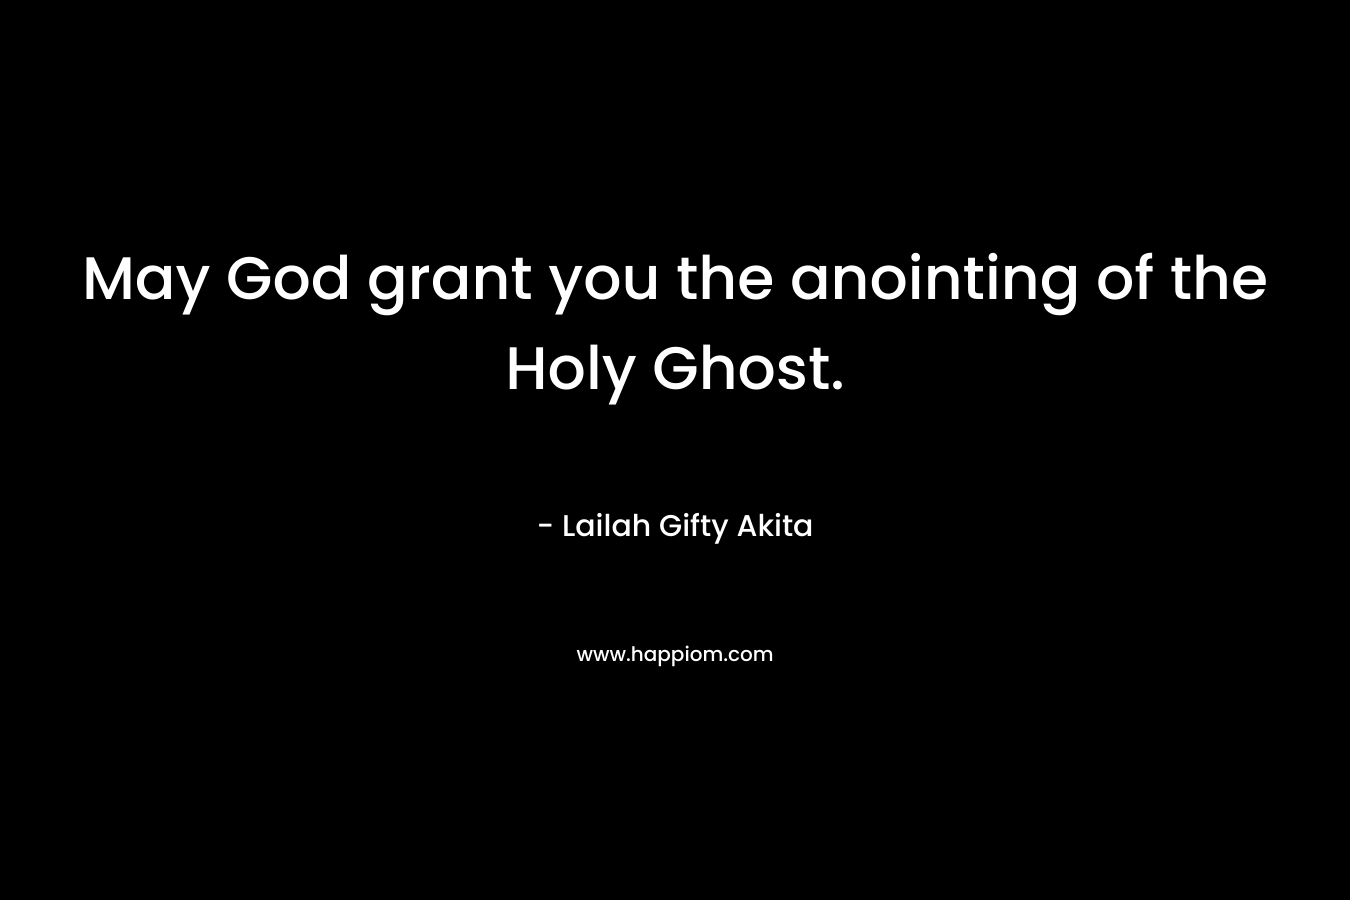 May God grant you the anointing of the Holy Ghost. – Lailah Gifty Akita